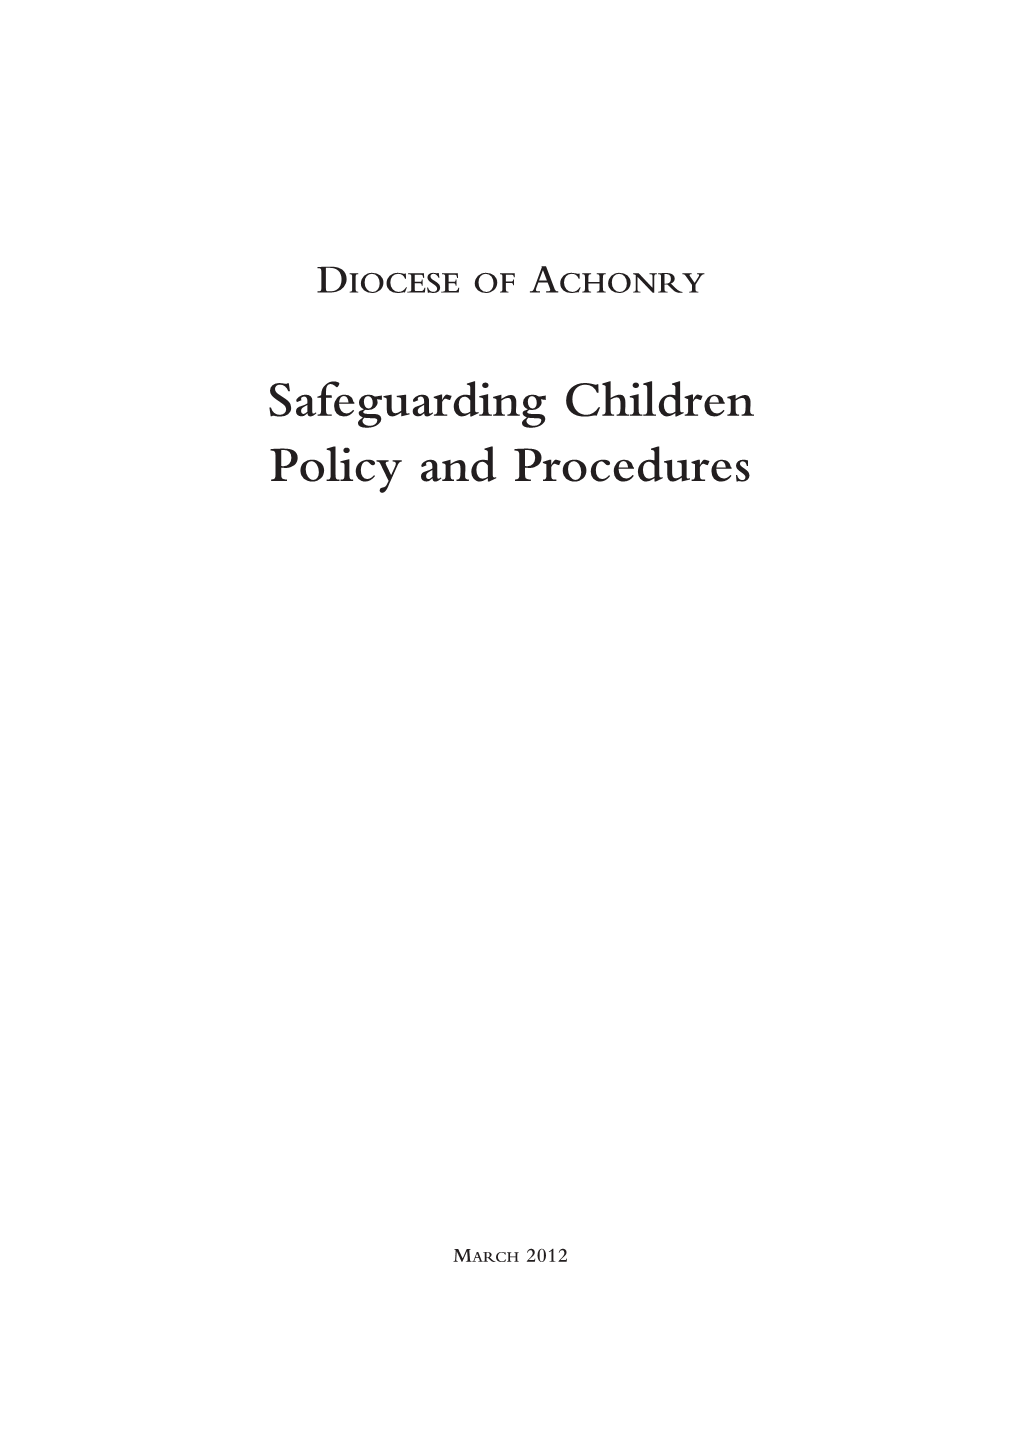 Safeguarding Children Policy and Procedures